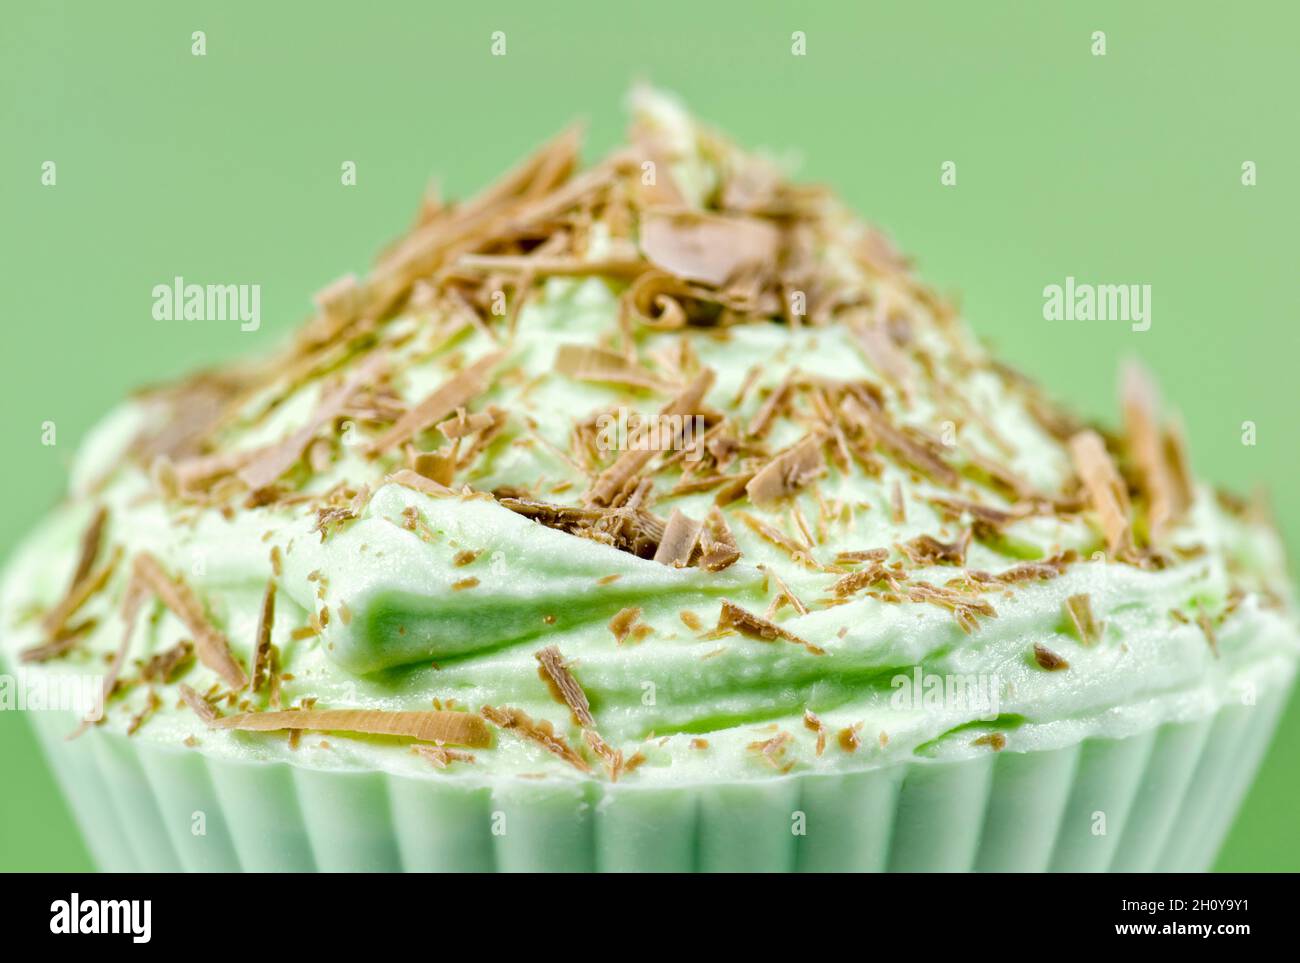 Pistachio cupcake with chocolate shavings and green icing against a pale green background Stock Photo